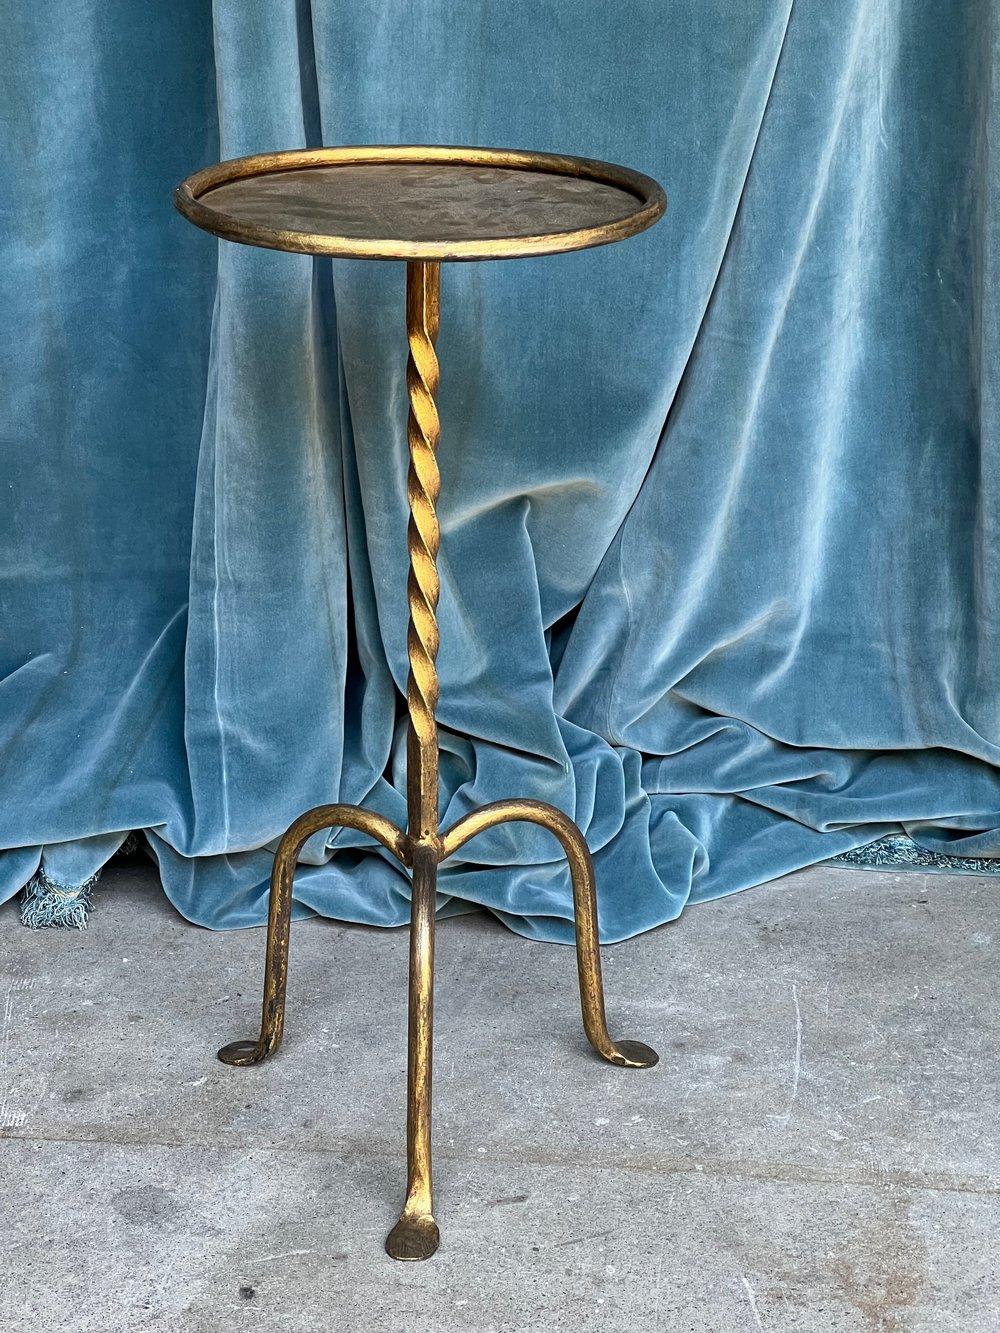 A handsome Spanish gilt iron drinks table from the 1950s, a unique and charming piece that will surely catch the eye. This small side table features a twisted stem design mounted on a sturdy tripod base, creating an aesthetically pleasing